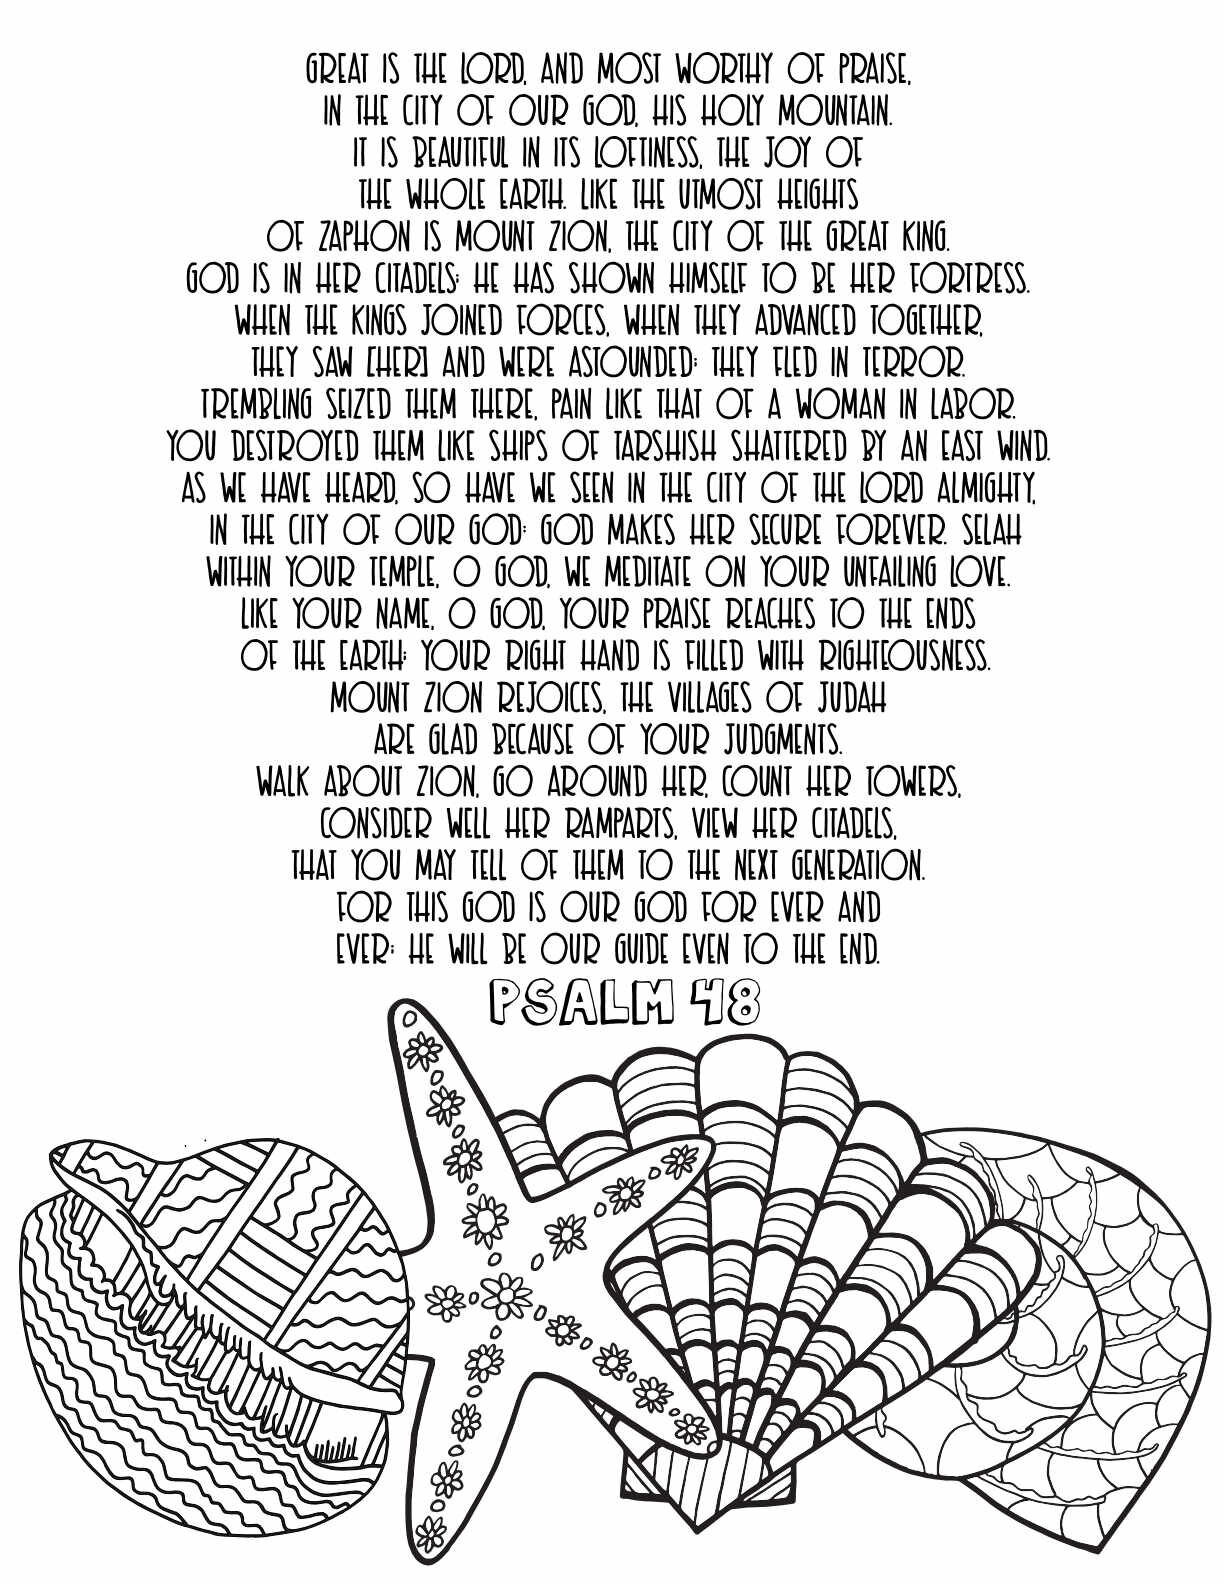 10 Free Printable Psalm Coloring Pages - Download and Color Adult Scripture - Psalm 48CLICK HERE TO DOWNLOAD THIS PAGE FREE